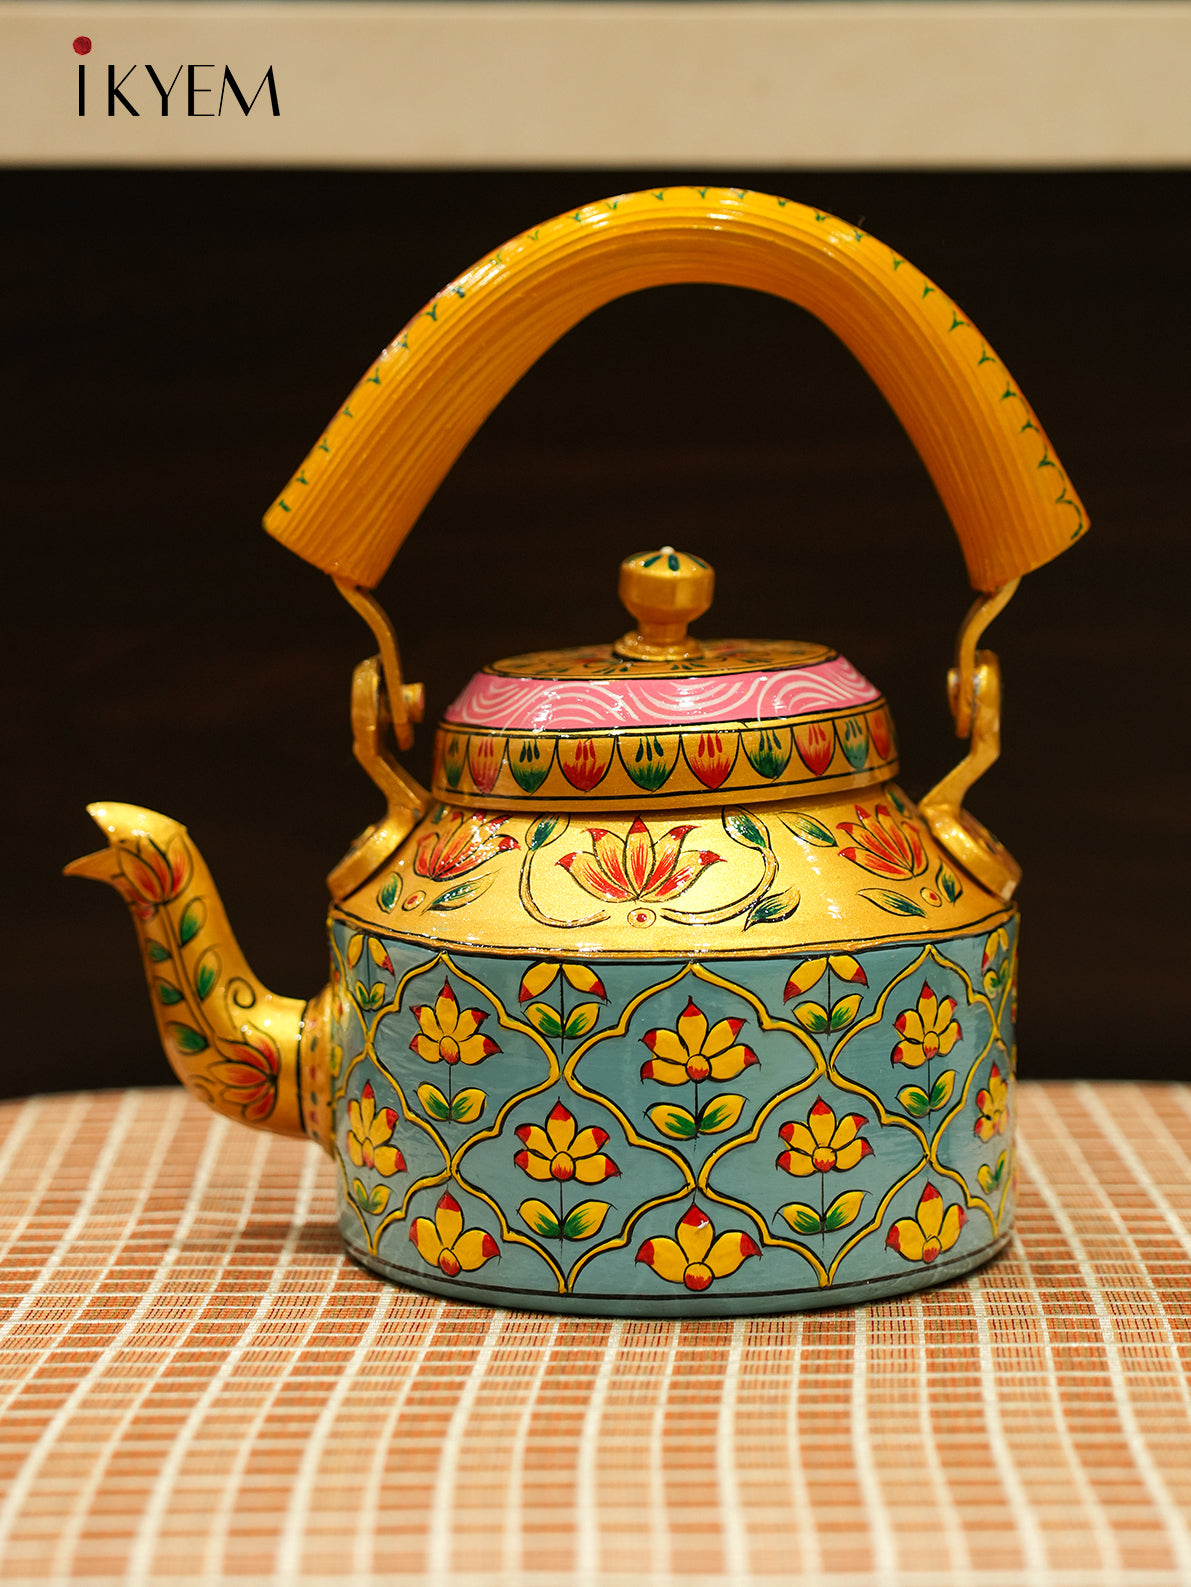 Hand Painted Kettle